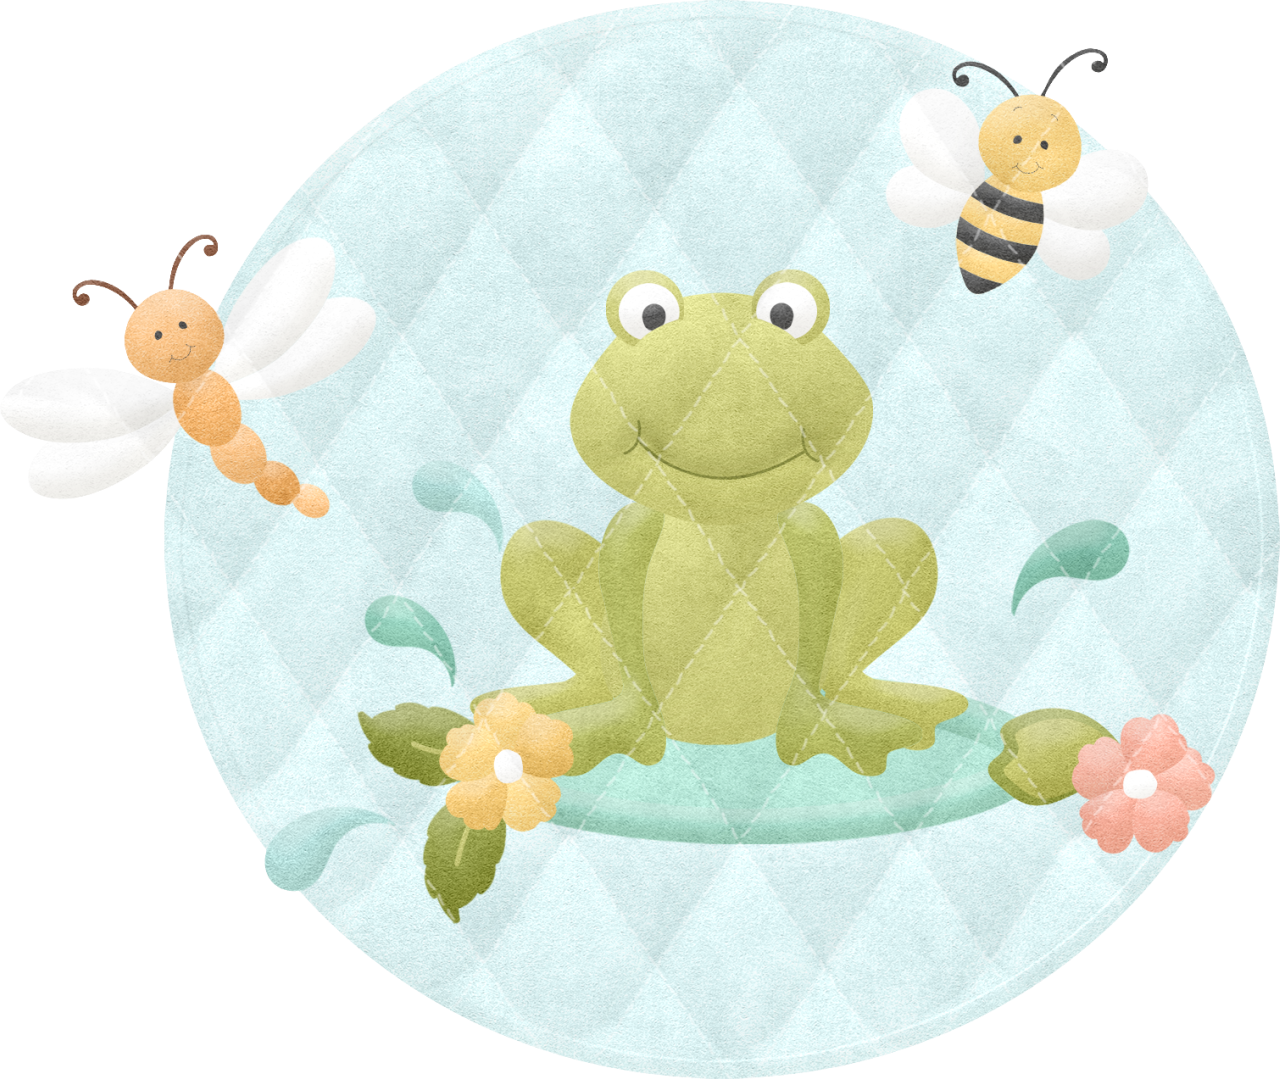 forest clipart pond